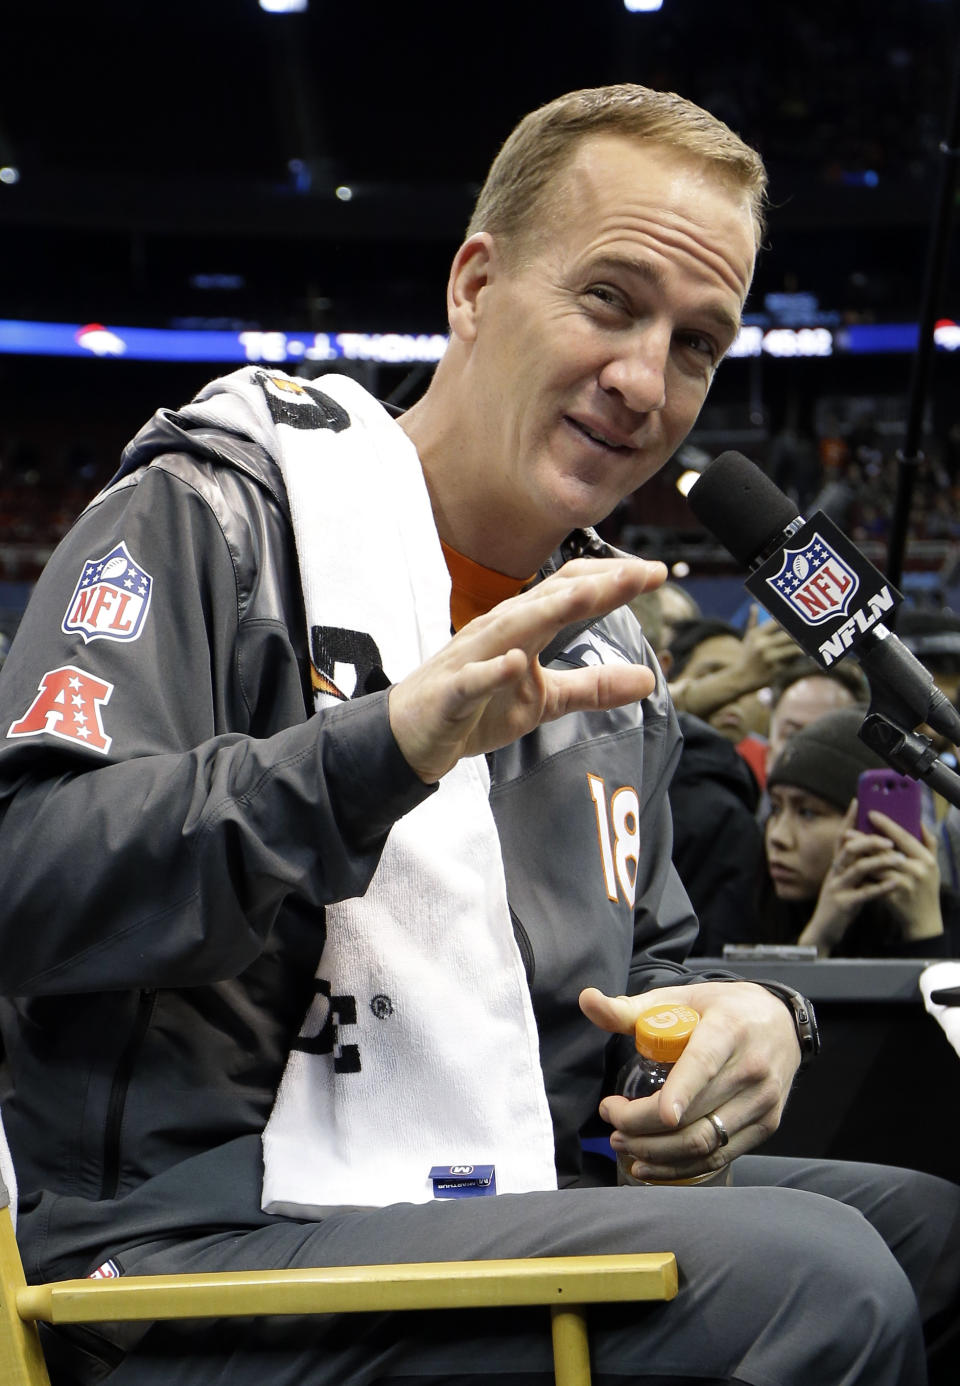 Denver Broncos' Peyton Manning answers a question during media day for the NFL Super Bowl XLVIII football game Tuesday, Jan. 28, 2014, in Newark, N.J. (AP Photo/Mark Humphrey)